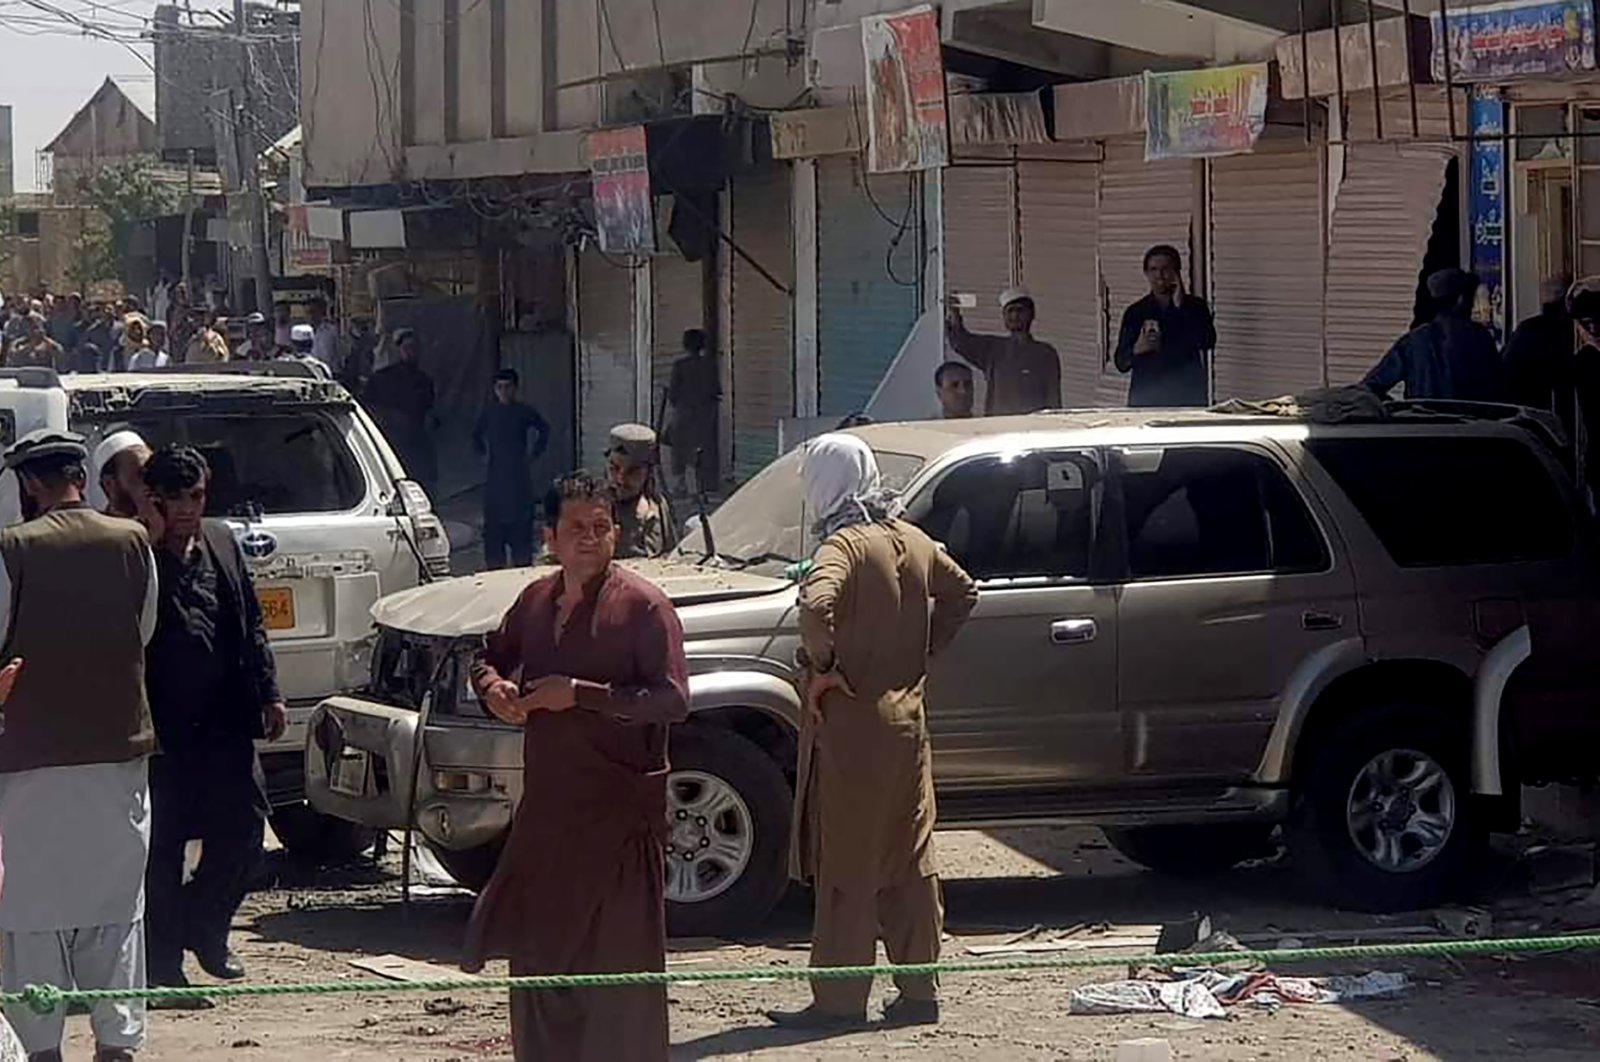 Police officers and local residents gather beside damaged vehicles at the site of a bomb blast in Chaman, southwestern Pakistan, May 21, 2021. (AP Photo)